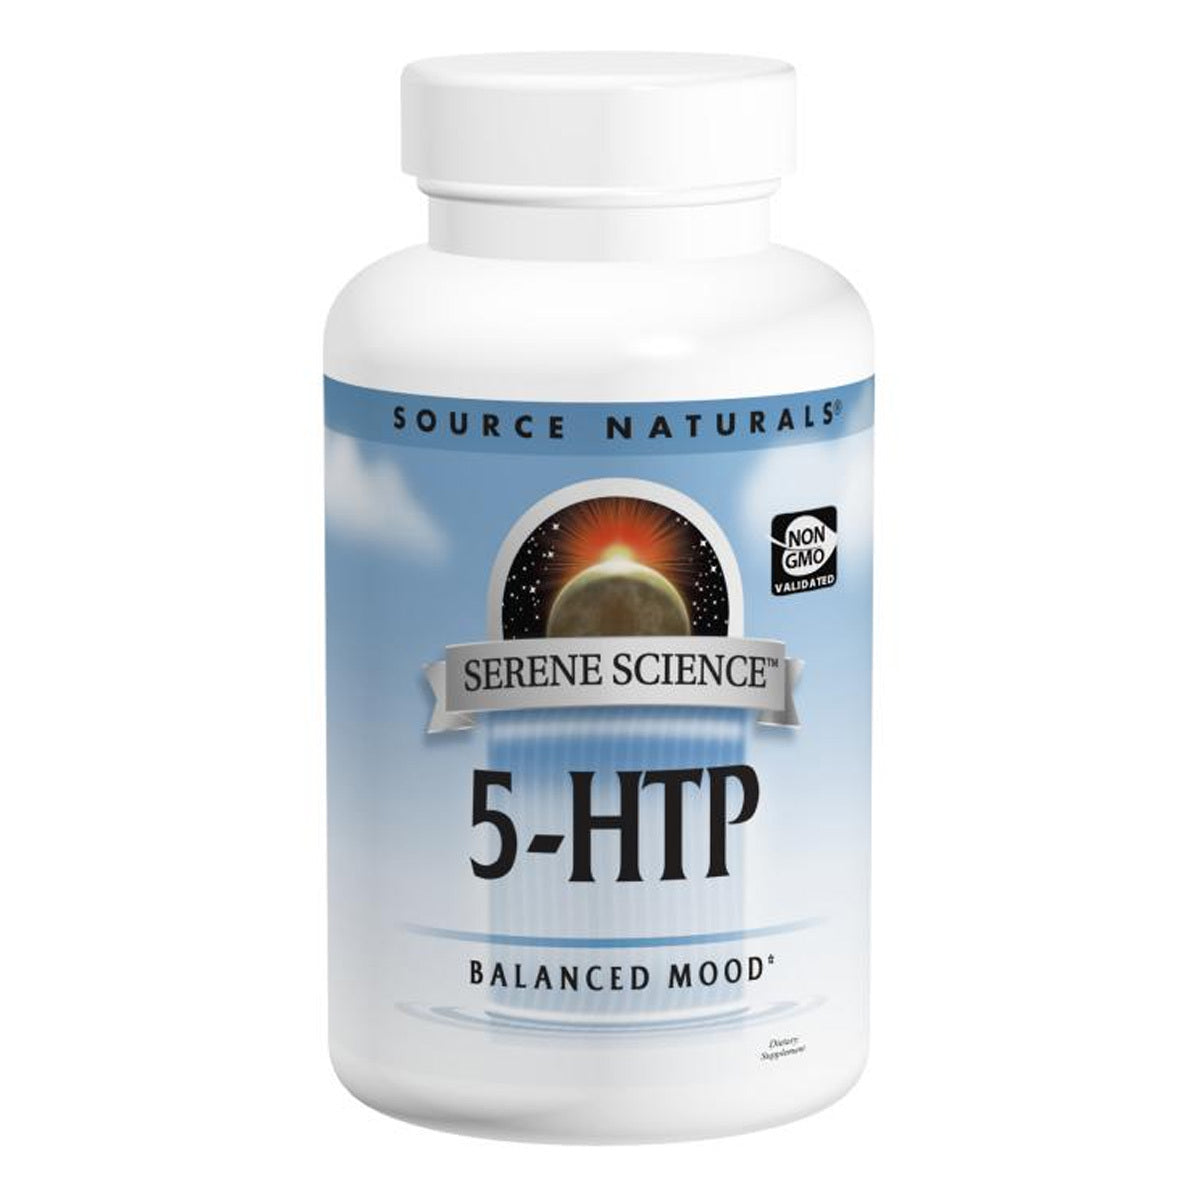 Primary image of Serene Science 5-HTP